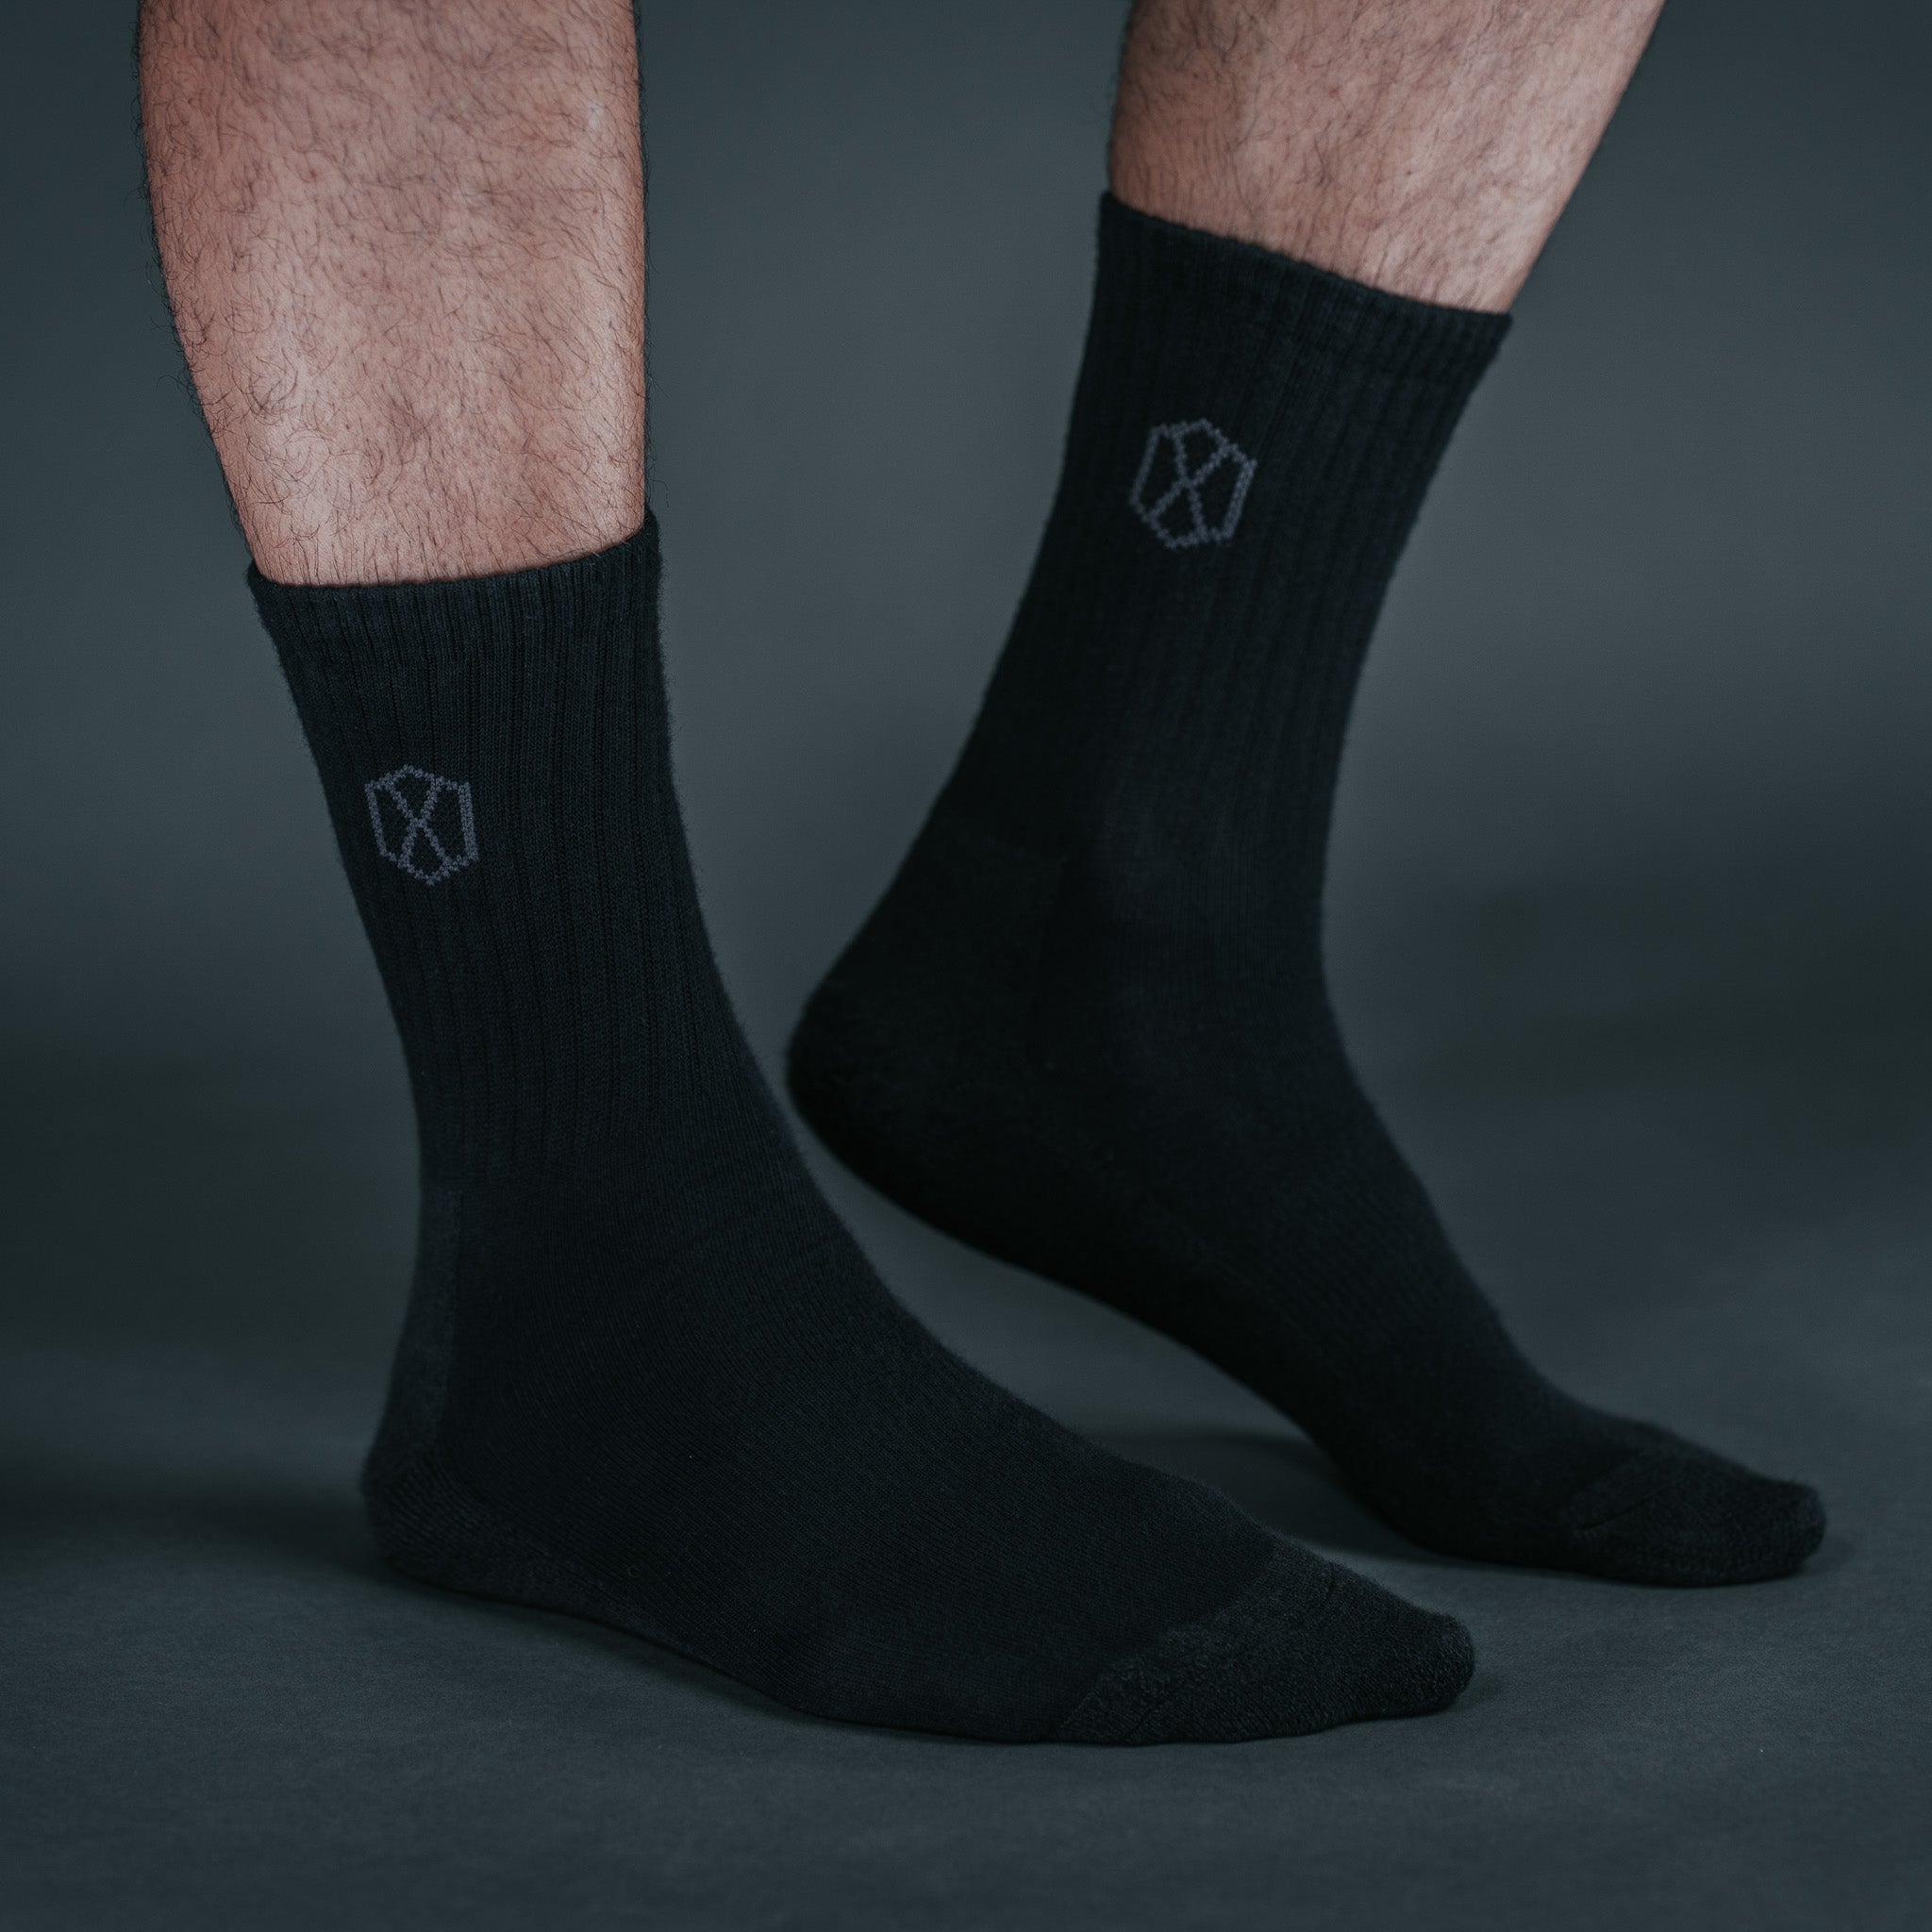 All Rounder Socks / Everyday Performance Series (crew) & Activewear Series (low cut)